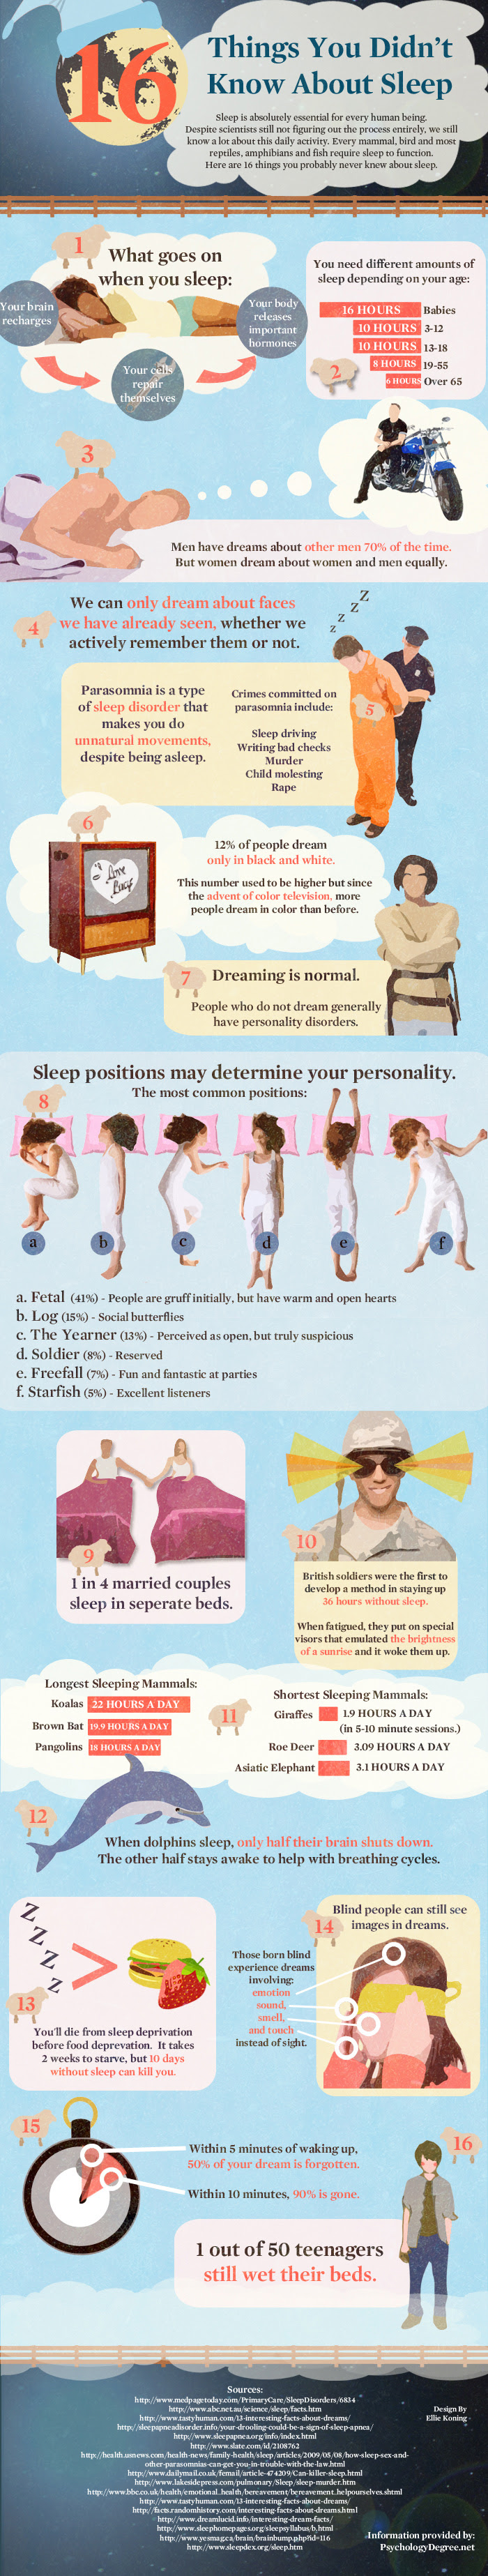 16 Things You Didn’t Know About Sleep